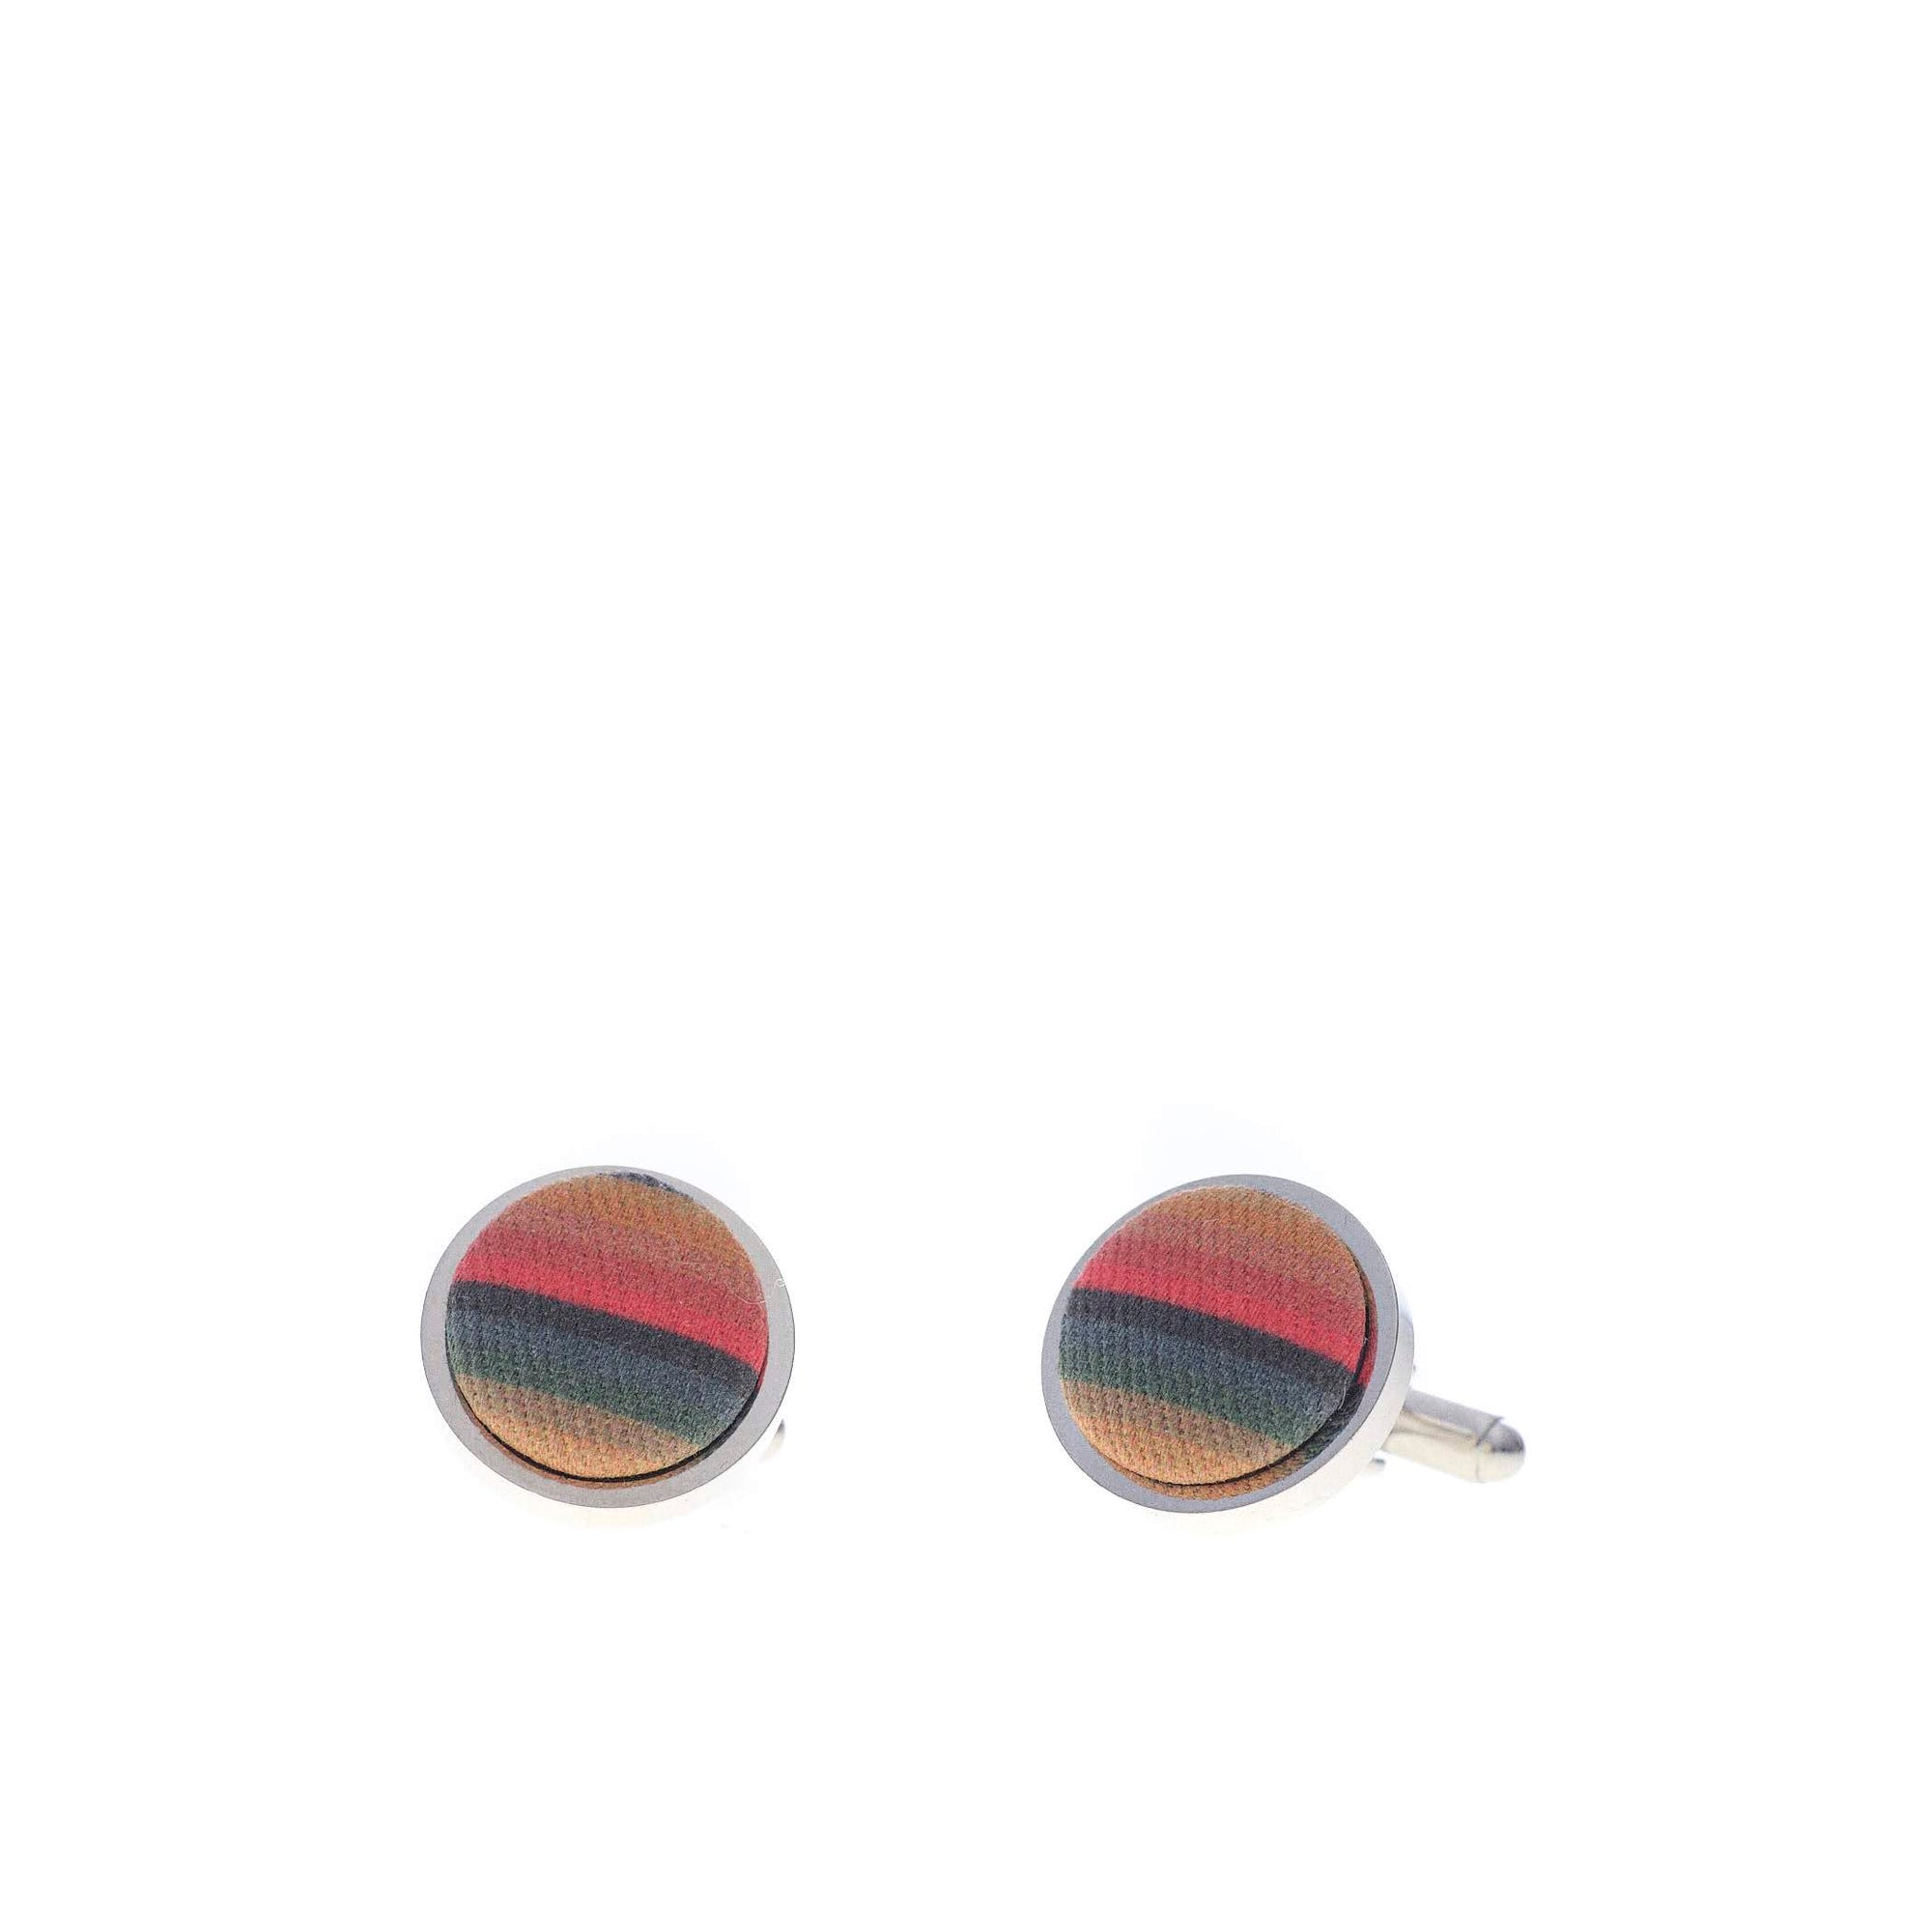 Doctor Who Cufflinks with Rainbow Stripe by the Belfast Bow Company